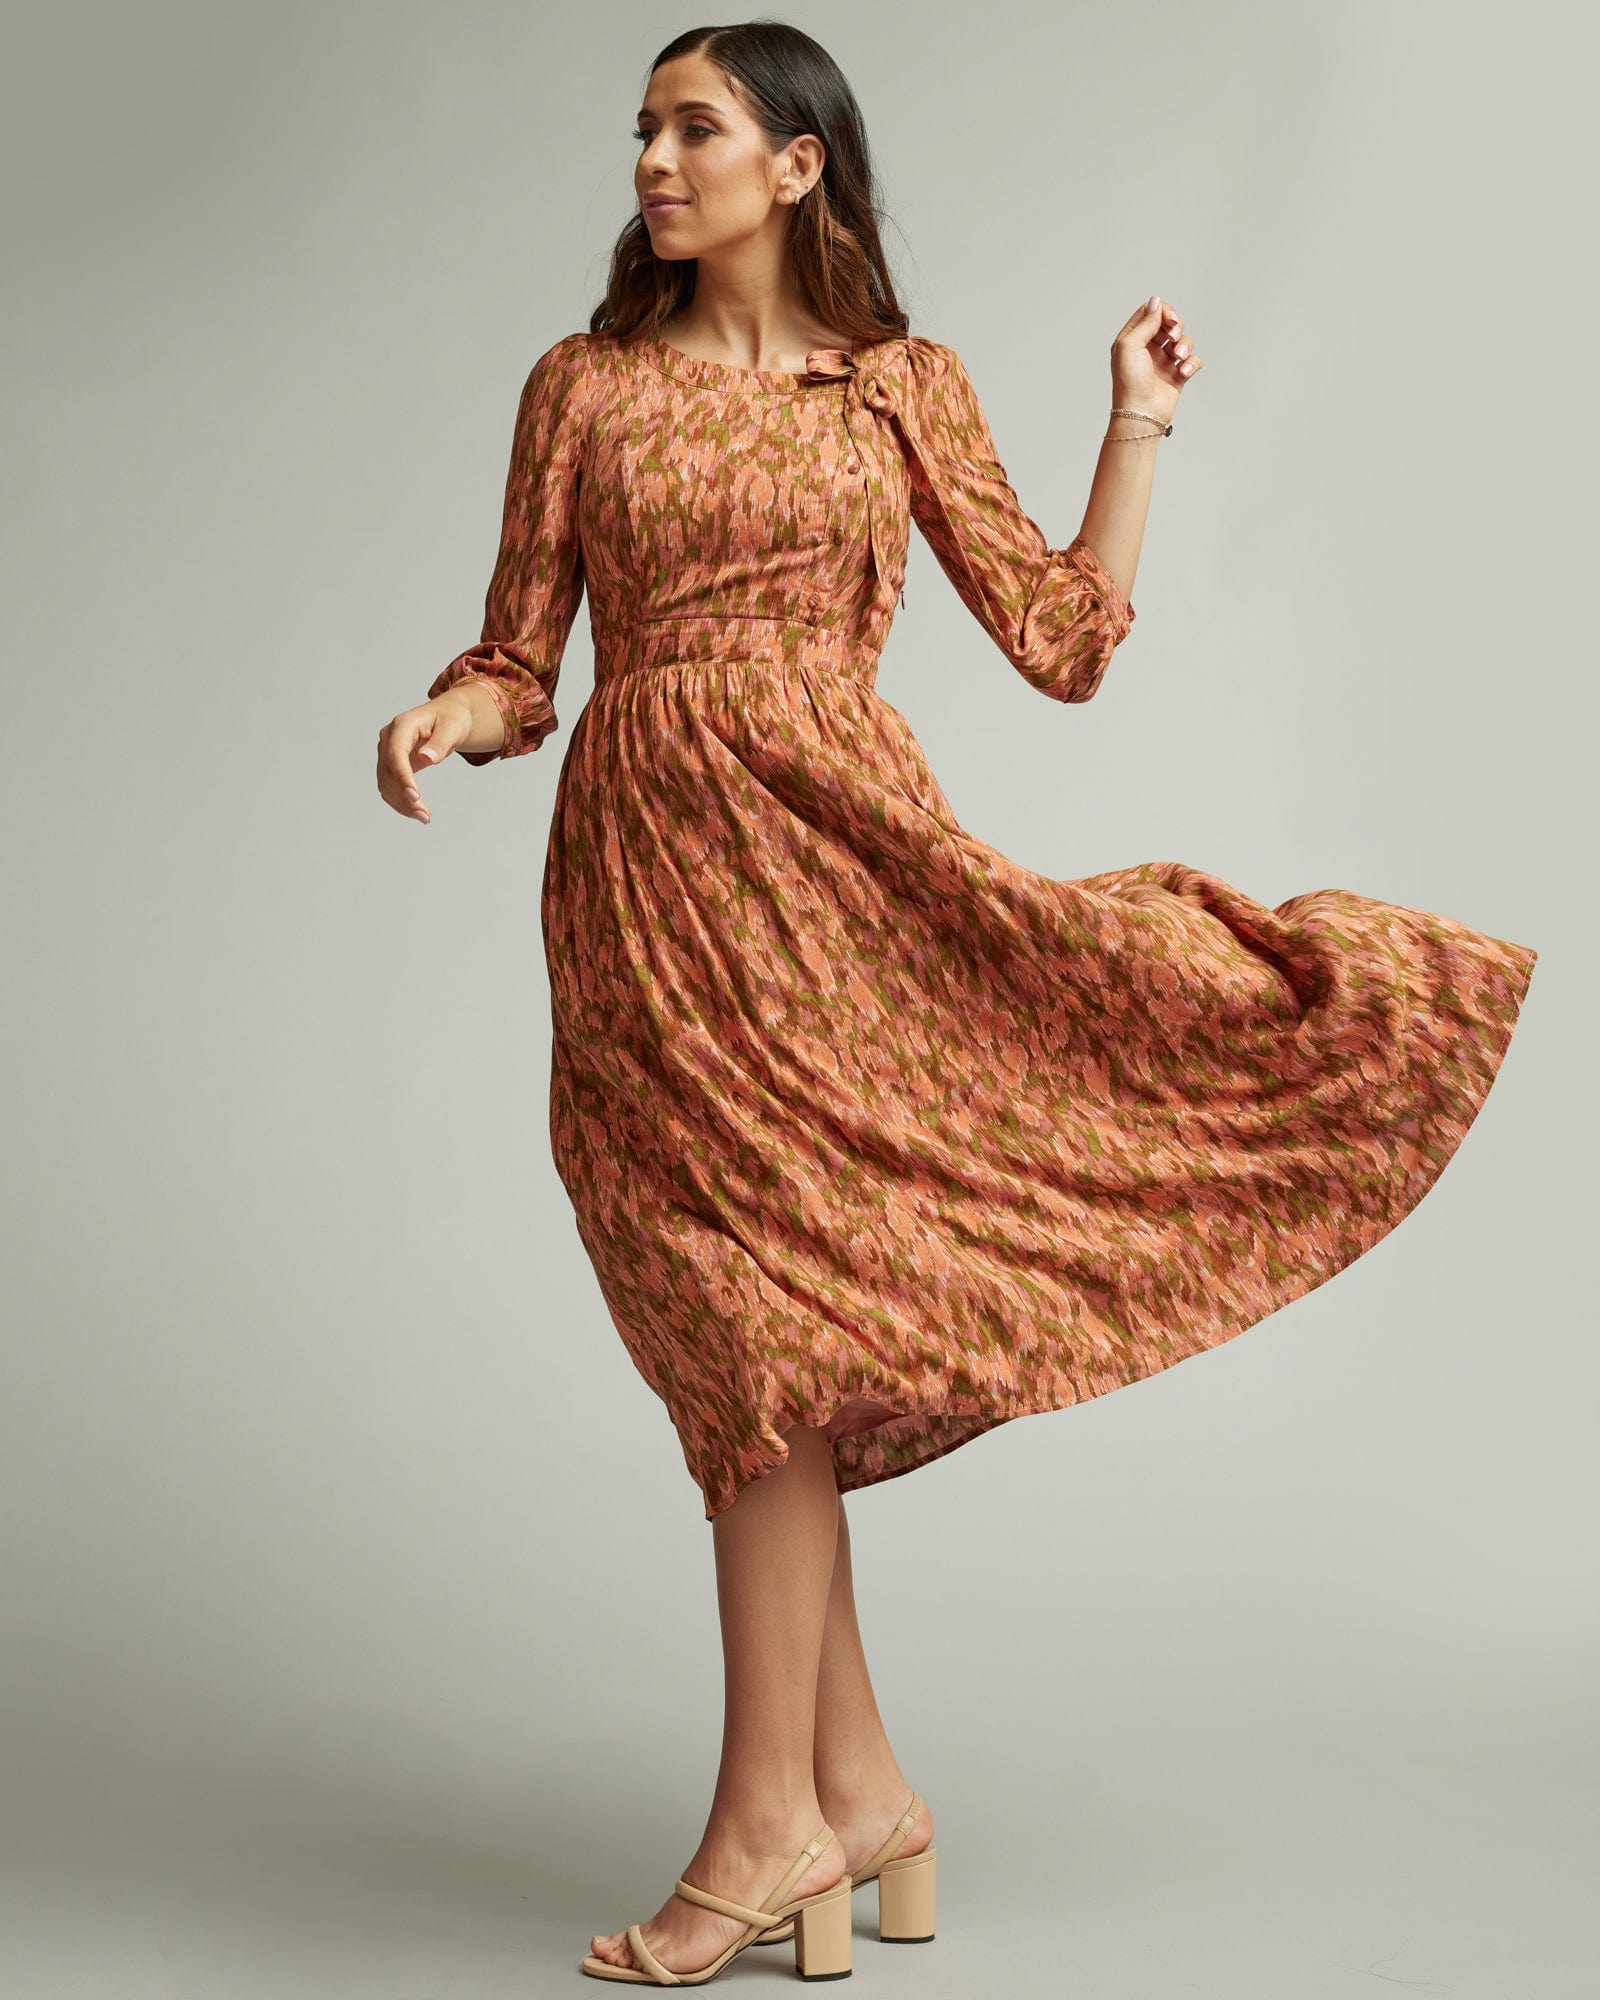 Woman in a 3/4 length sleeve, midi-length dress in orange and brown.